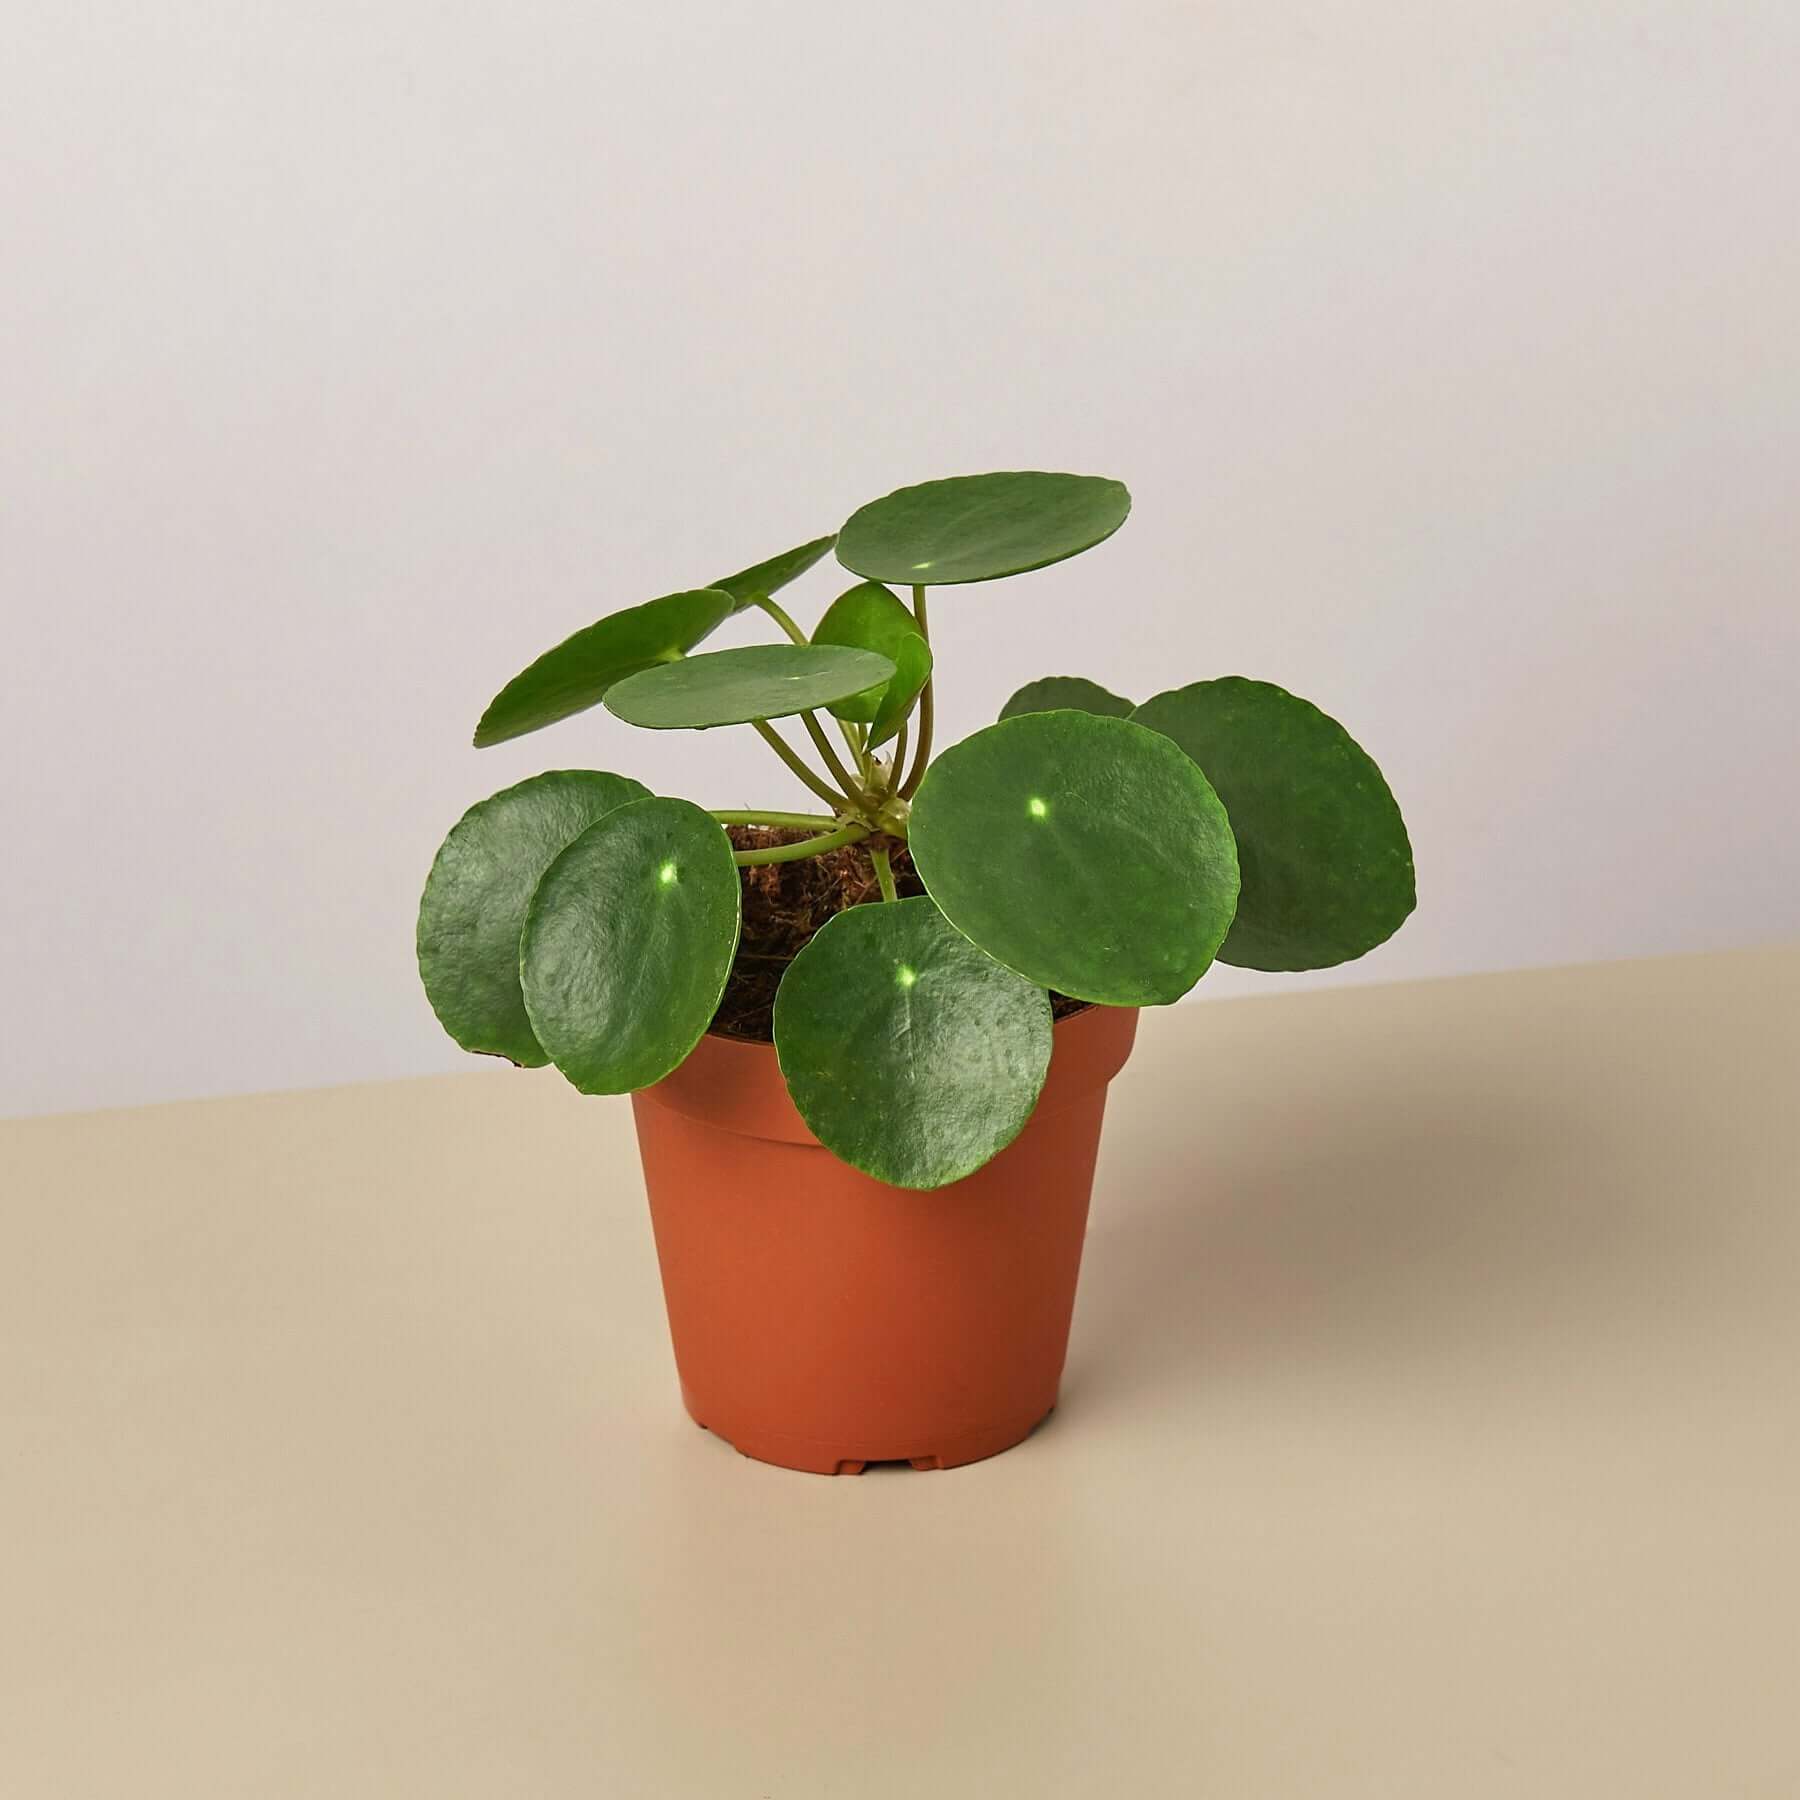 Pilea Peperomioides - Chinese Money Plant | Modern house plants that clean the air